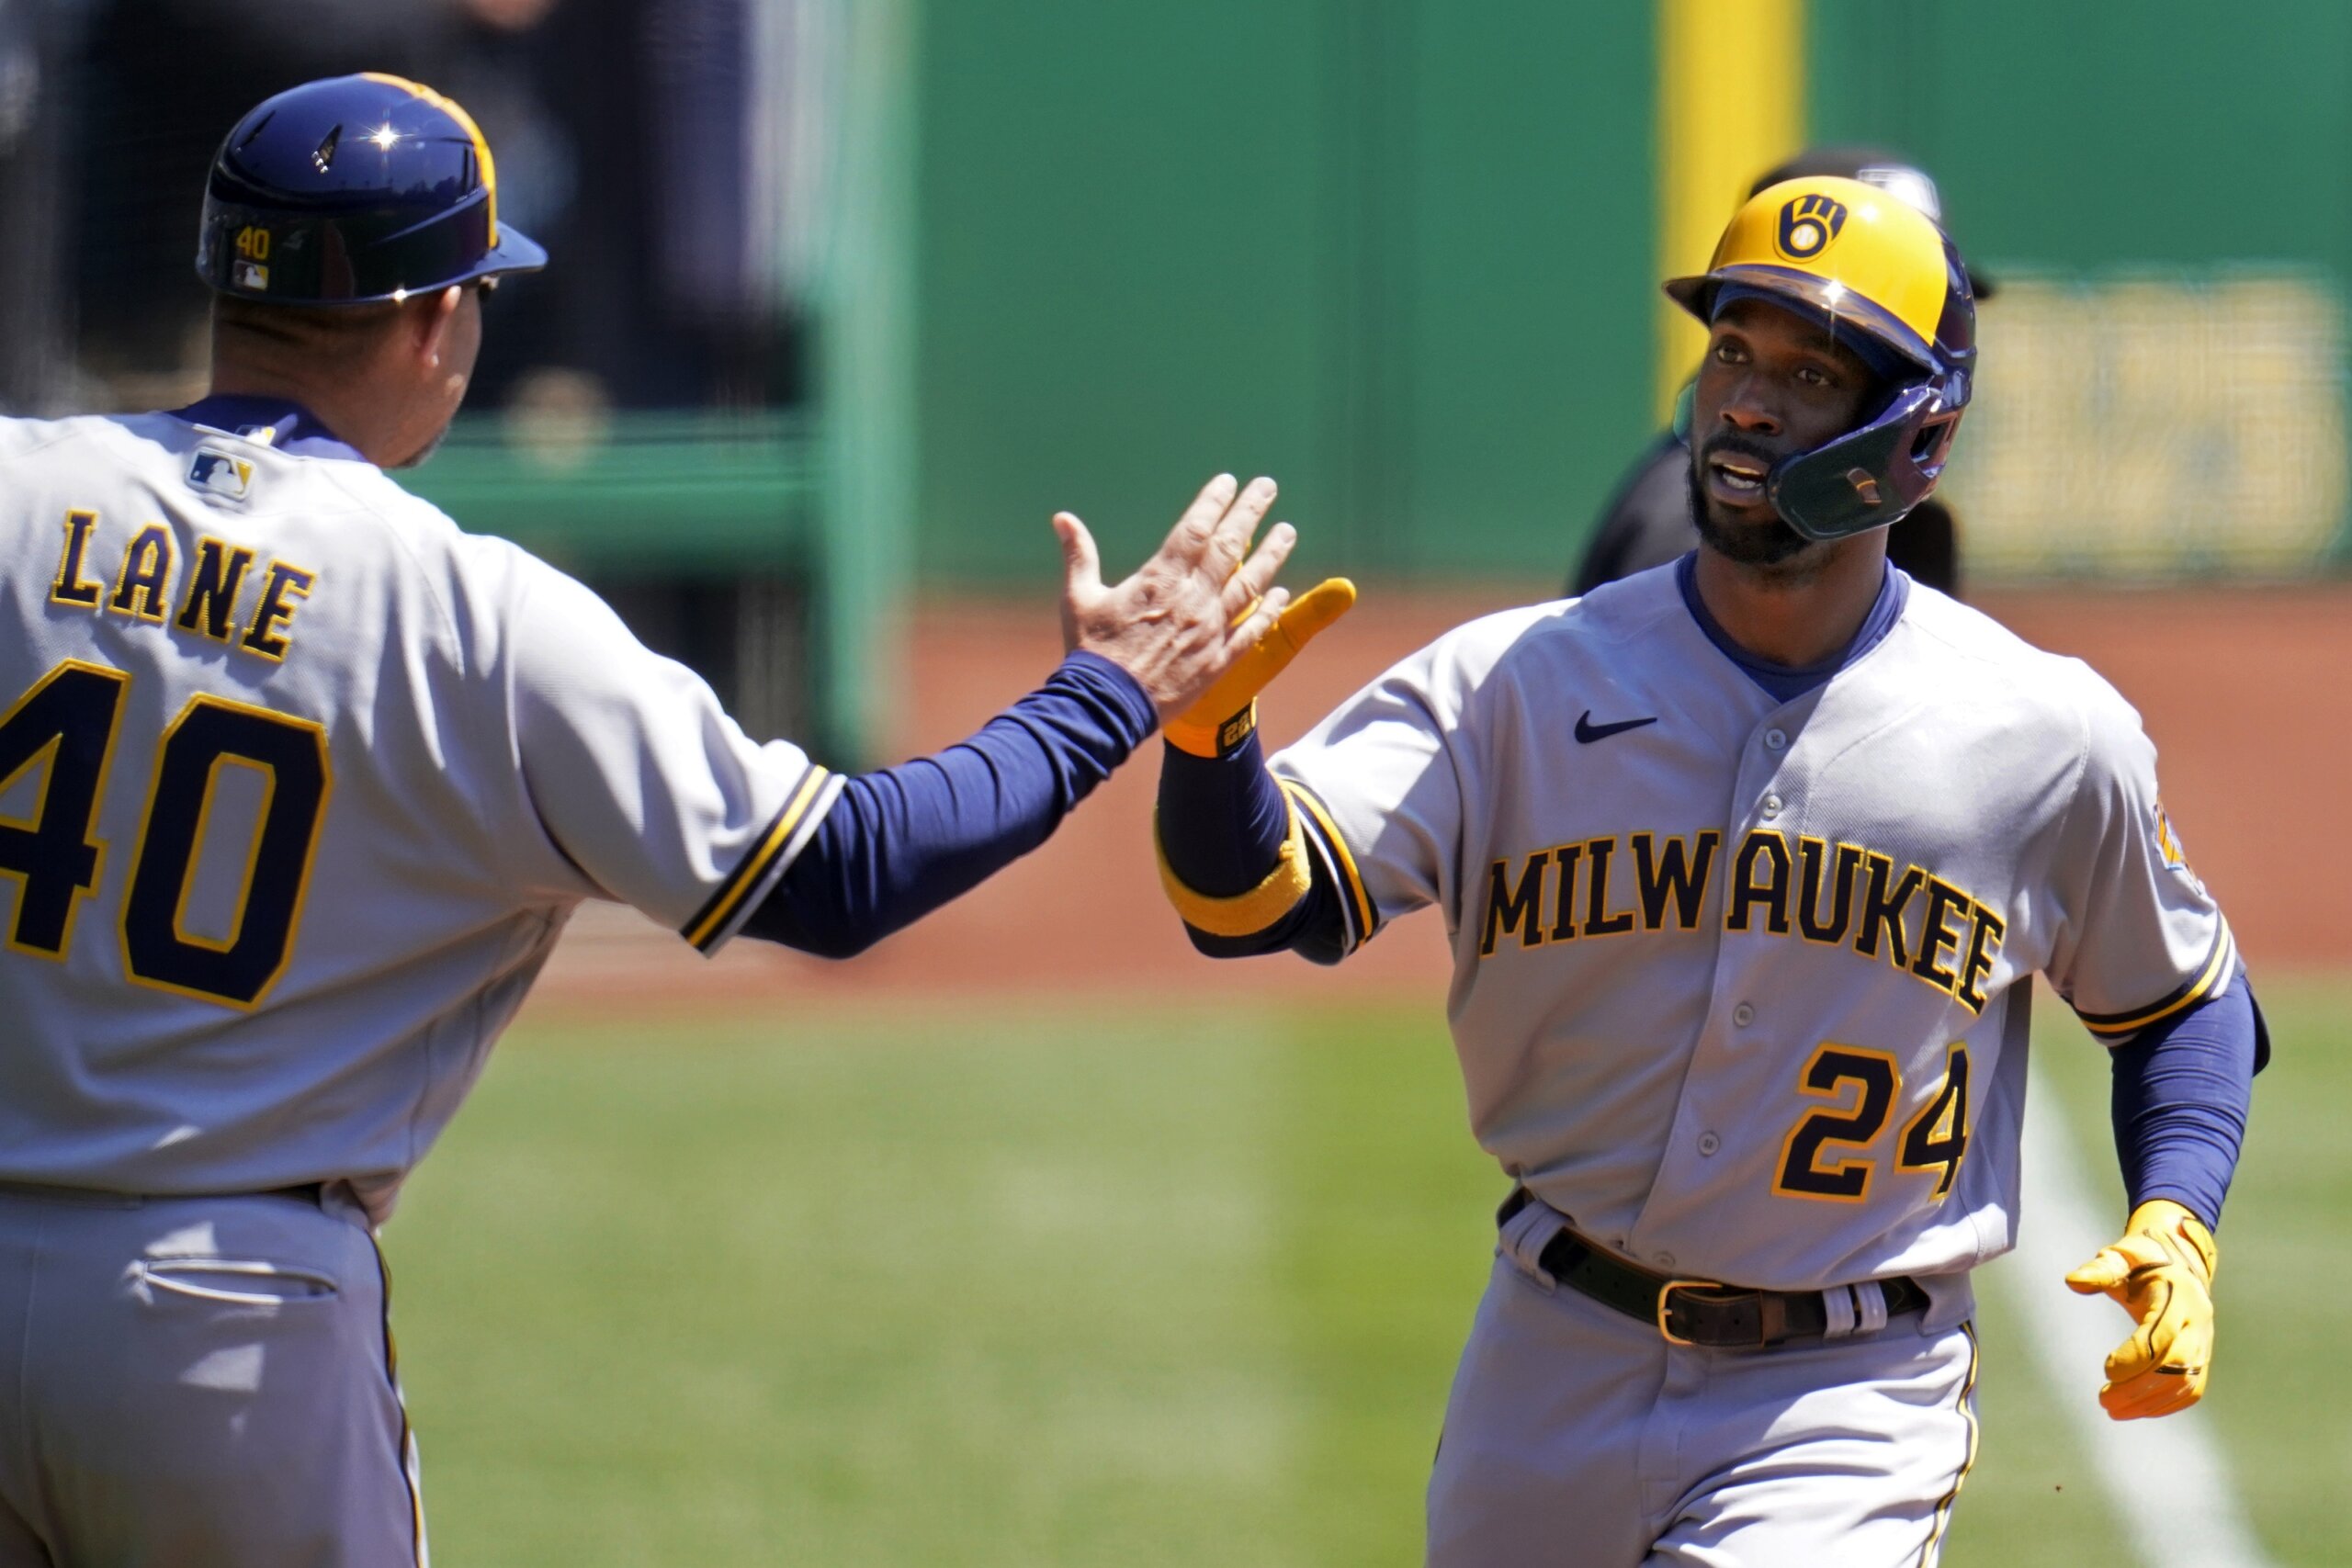 McCutchen rallies Brewers past Pirates 3-2 to complete sweep - WTOP News